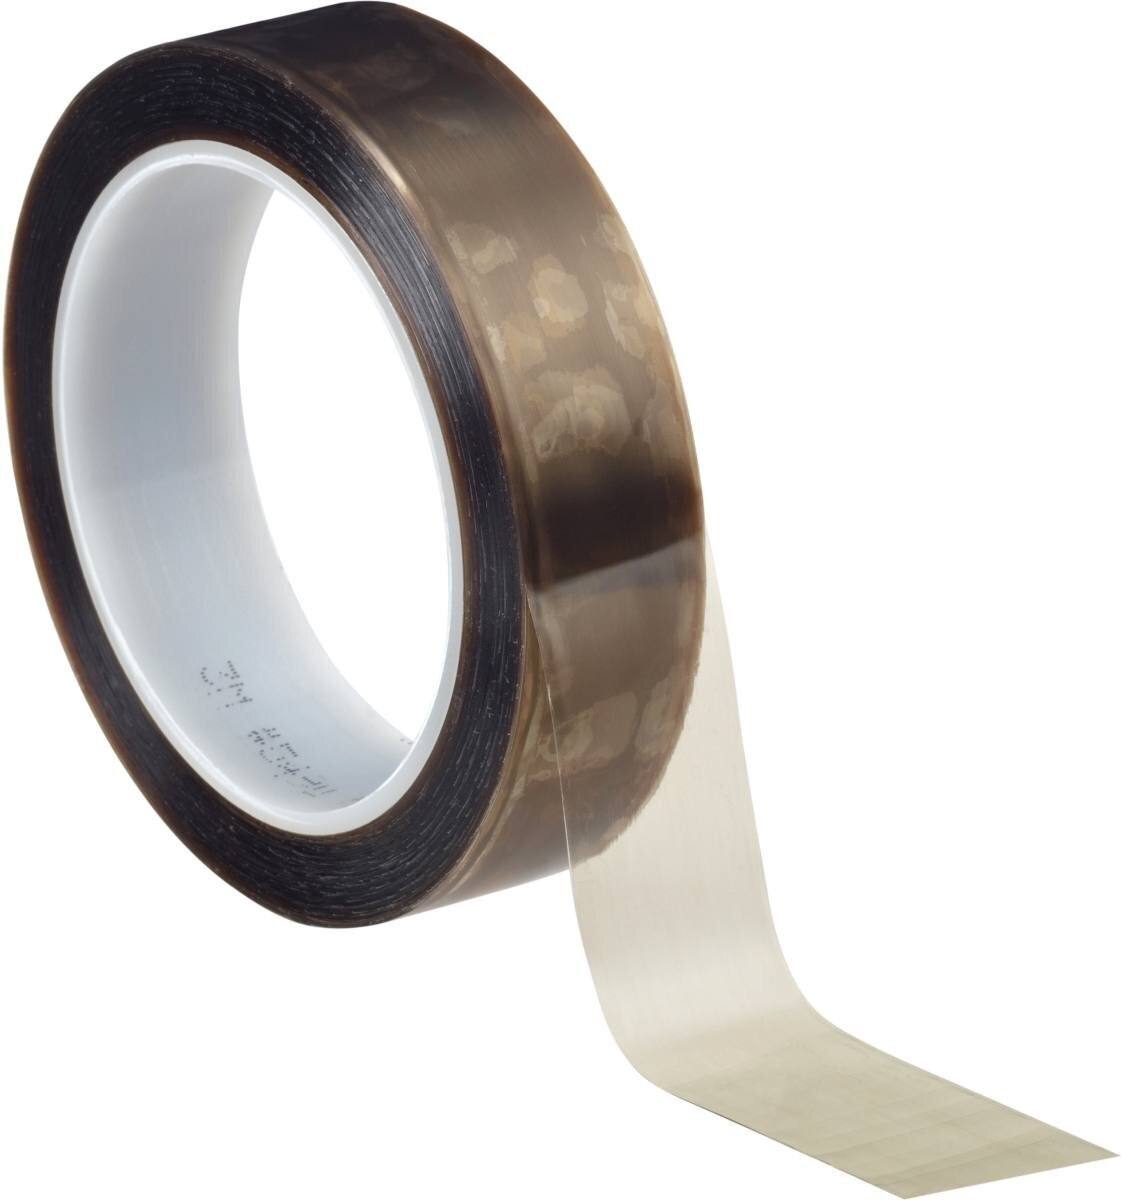 3M 5491 PTFE extruded film adhesive tape 25mmx33m, 0.17mm, silicone